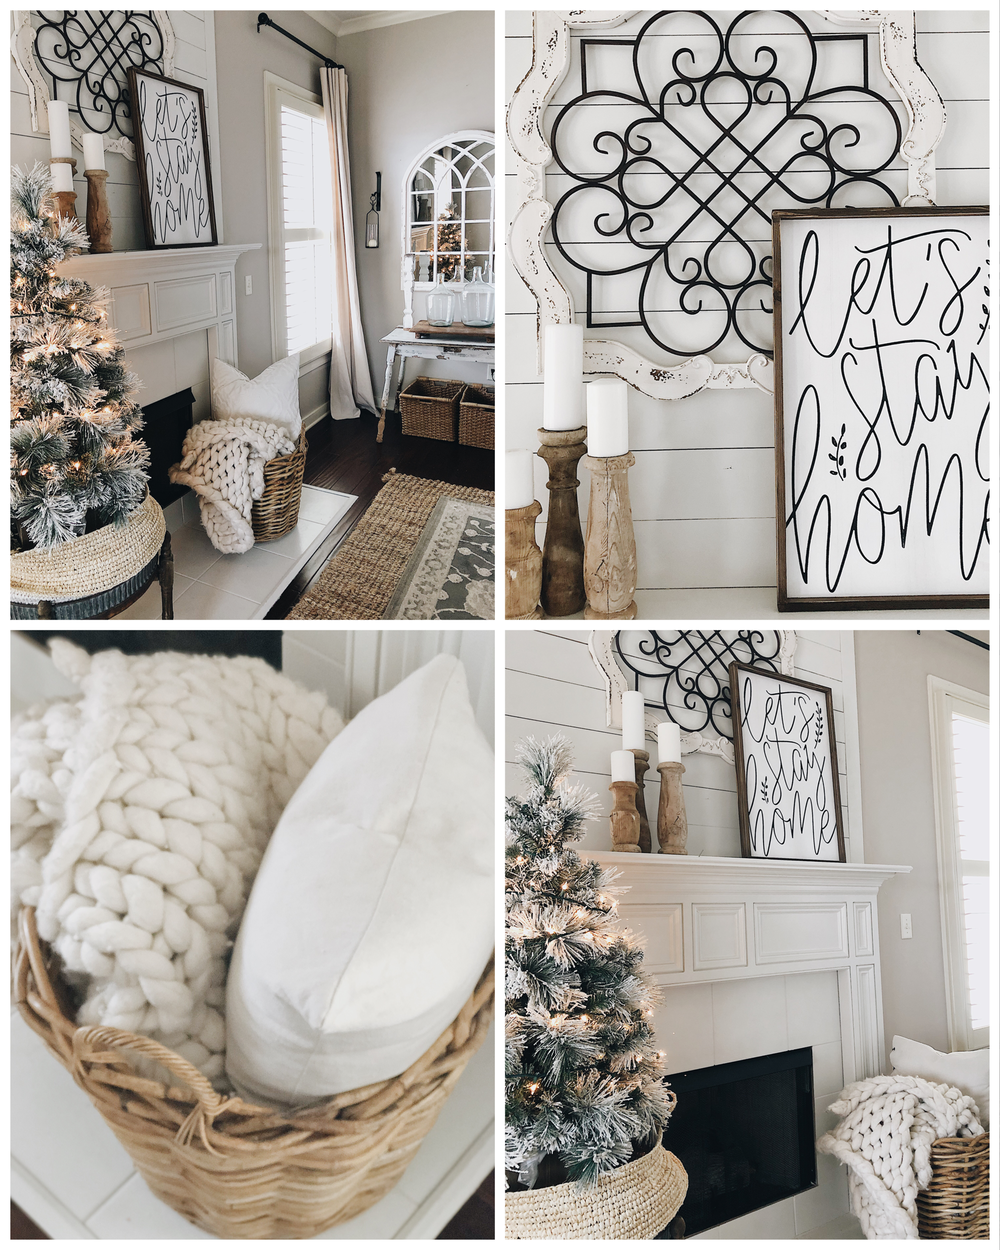 How To Decorate Your Mantel For Winter In 5 Easy Steps.png